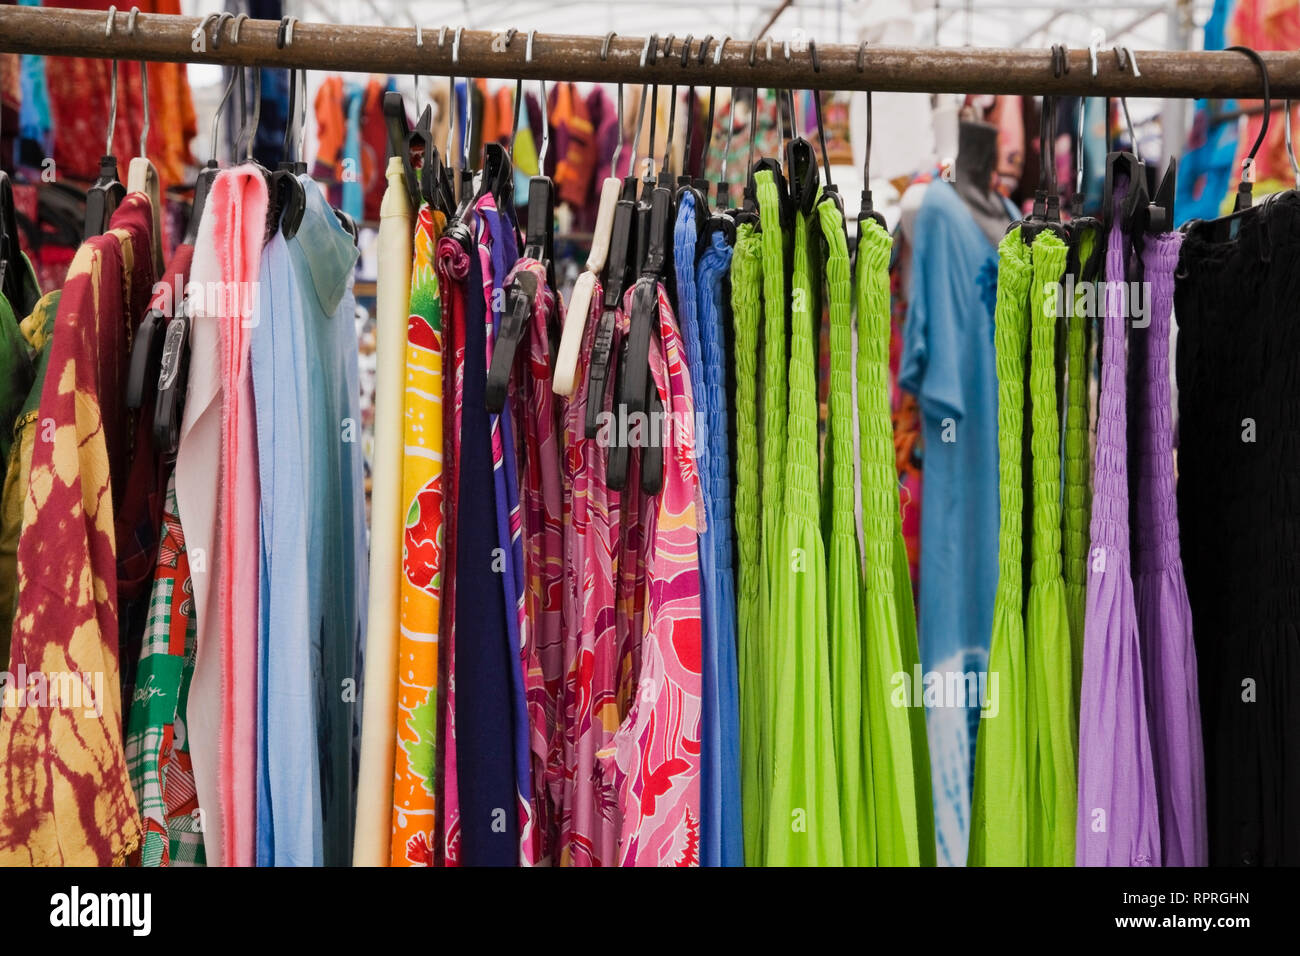 Women's cotton dresses for sale on a clothes rack at an outdoor market Stock Photo